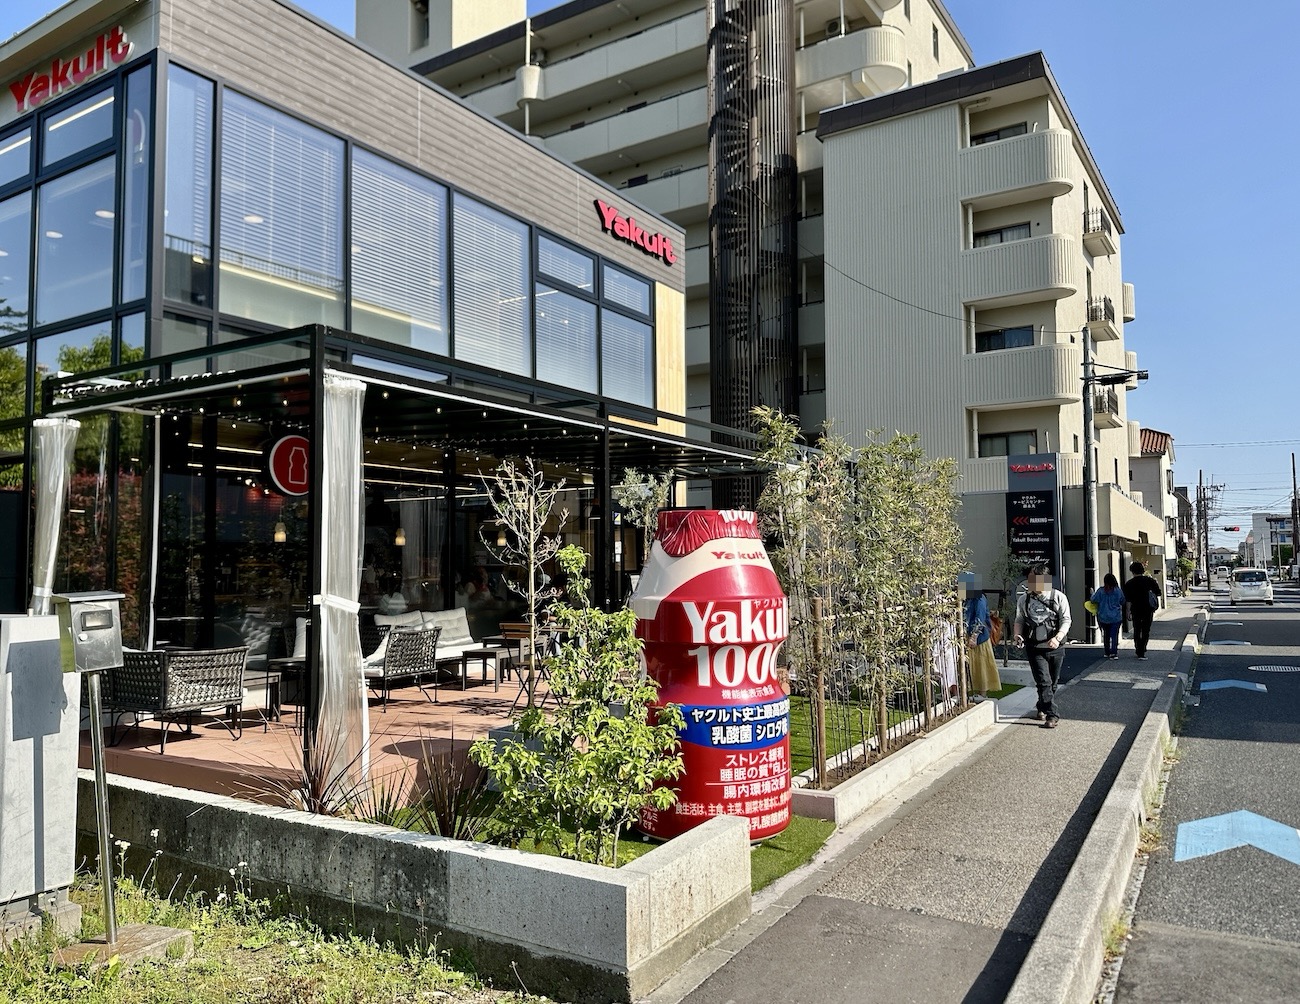 Japan’s first-ever Yakult cafe serves a rare probiotic ice cream in the shadow of a famous castle